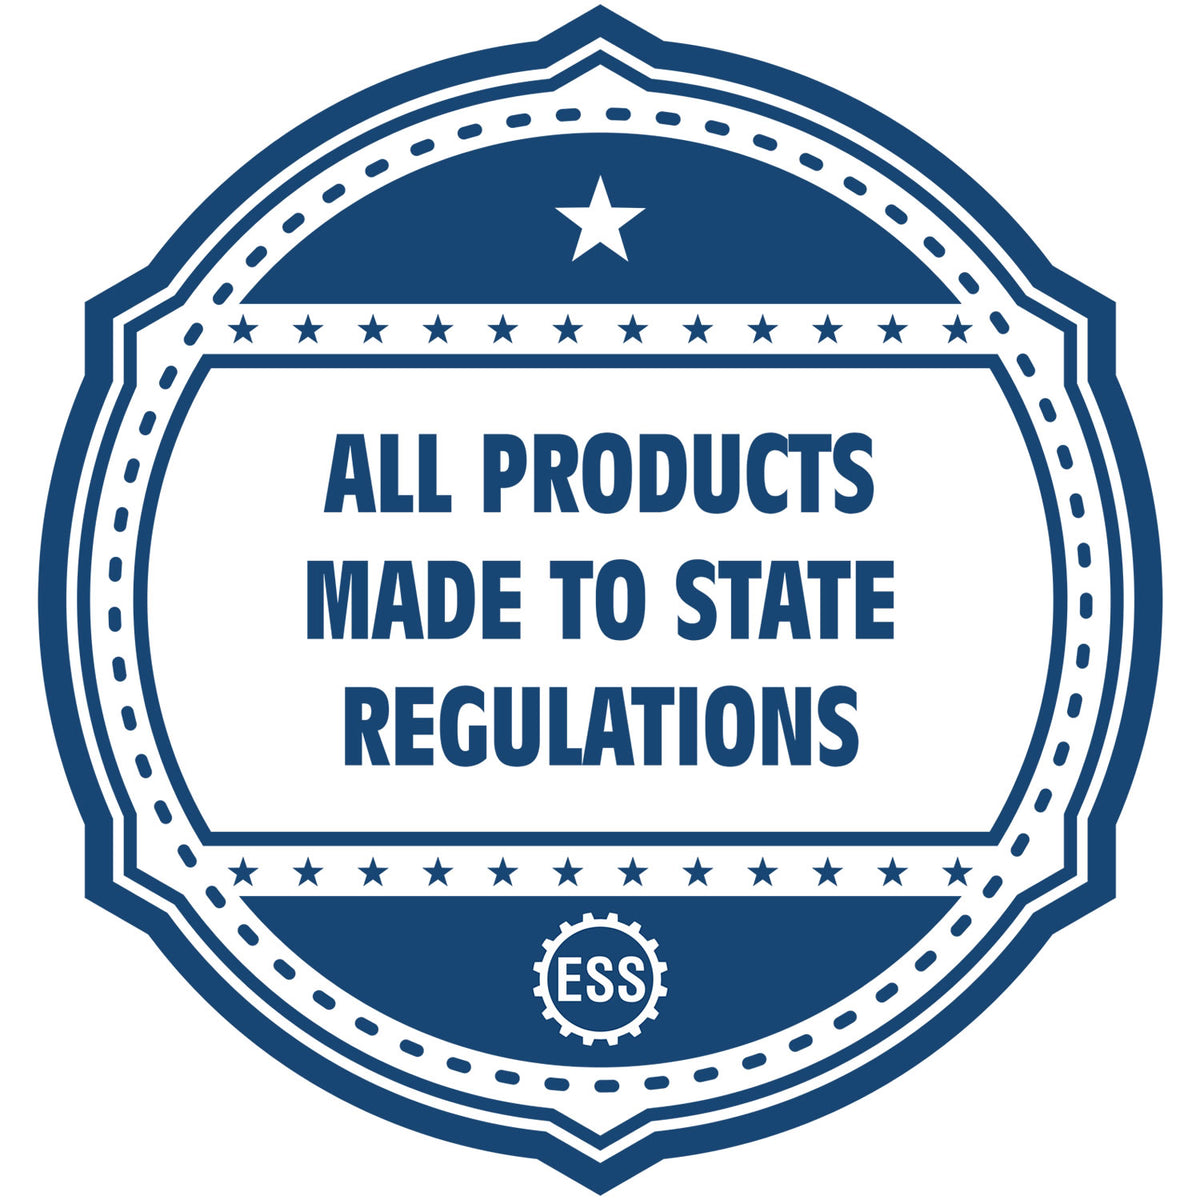 An icon or badge element for the Self-Inking State Seal Montana Notary Stamp showing that this product is made in compliance with state regulations.